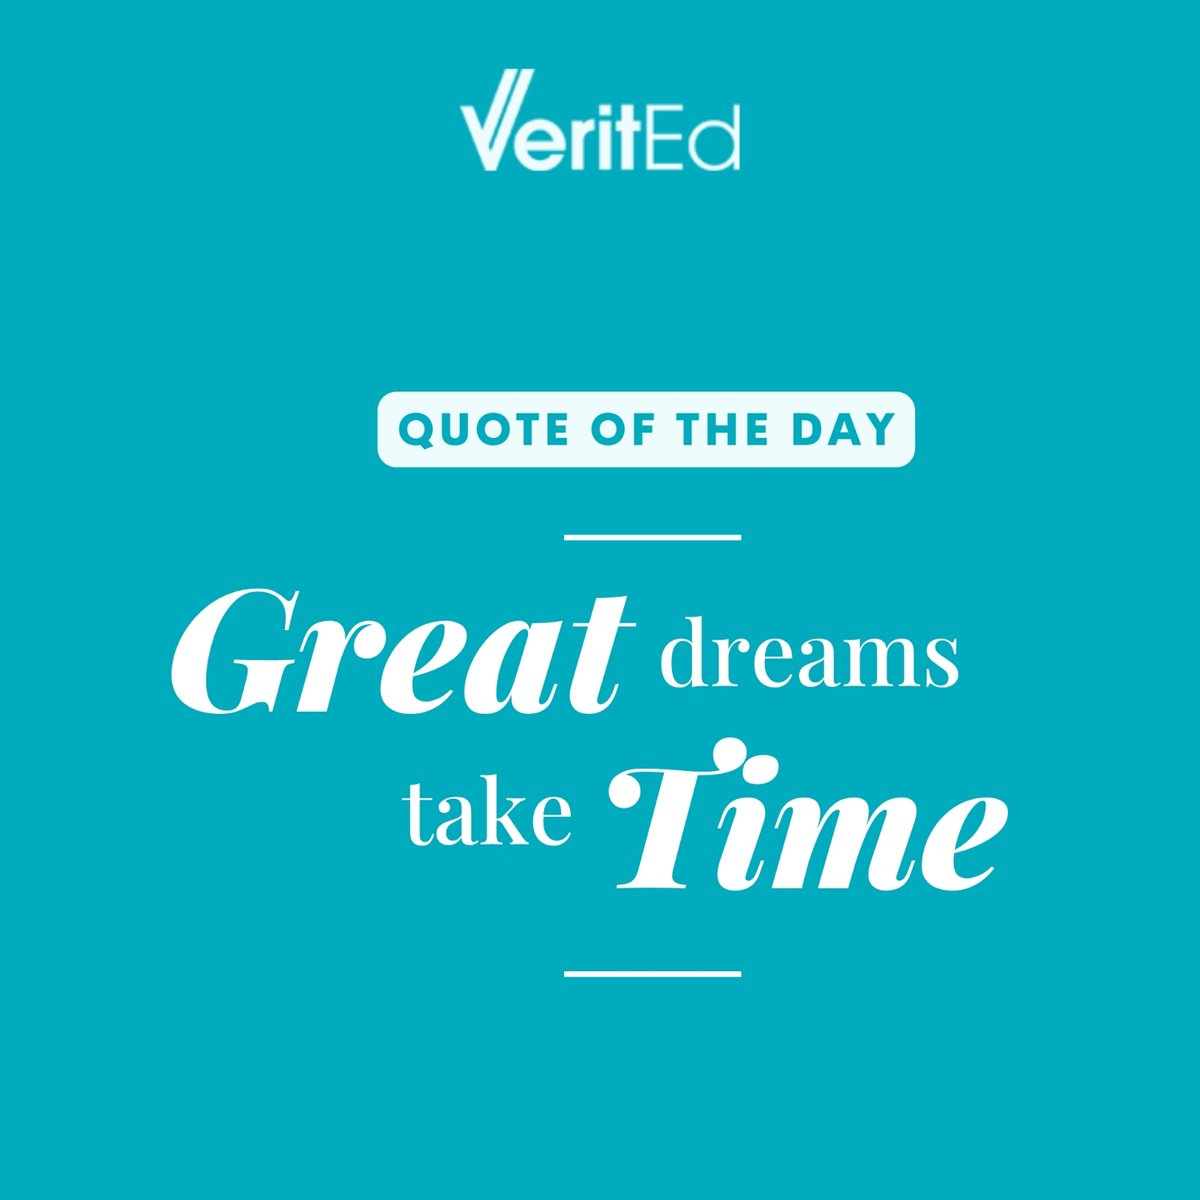 Today's reminder to keep pushing forward and staying patient on your journey. Big dreams require dedication, perseverance, and a belief in the process. ✨
.
.
#VeritEd #ElevateEducation #PersonalizedTutoring #Mentorship #HighAchievers #QualityEducation #AffordableTutoring